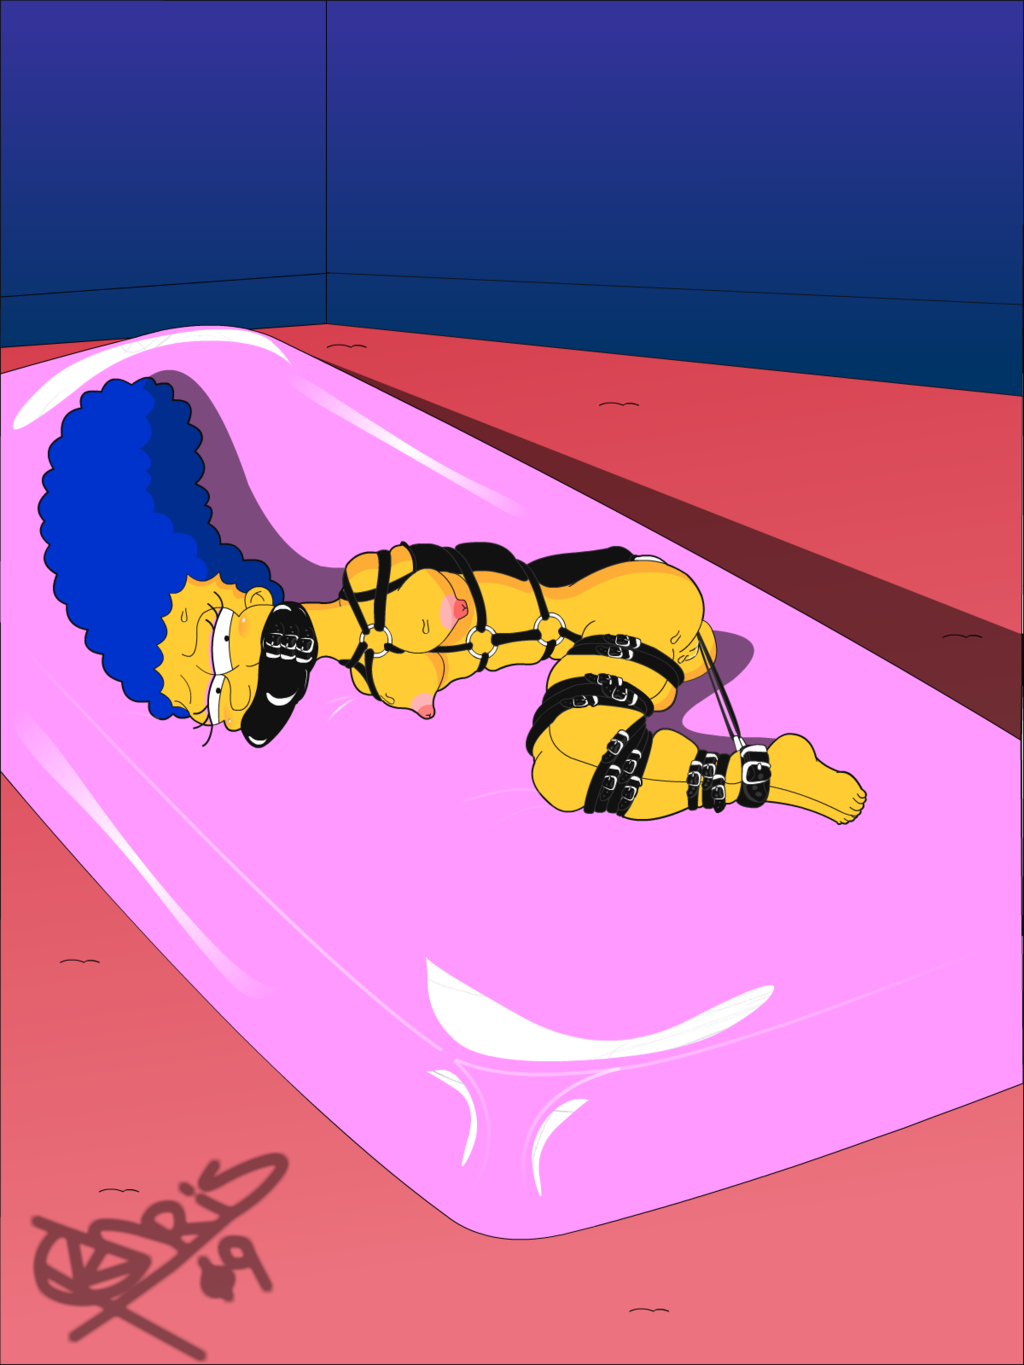 Marge Simpson (The Simpsons) 01.